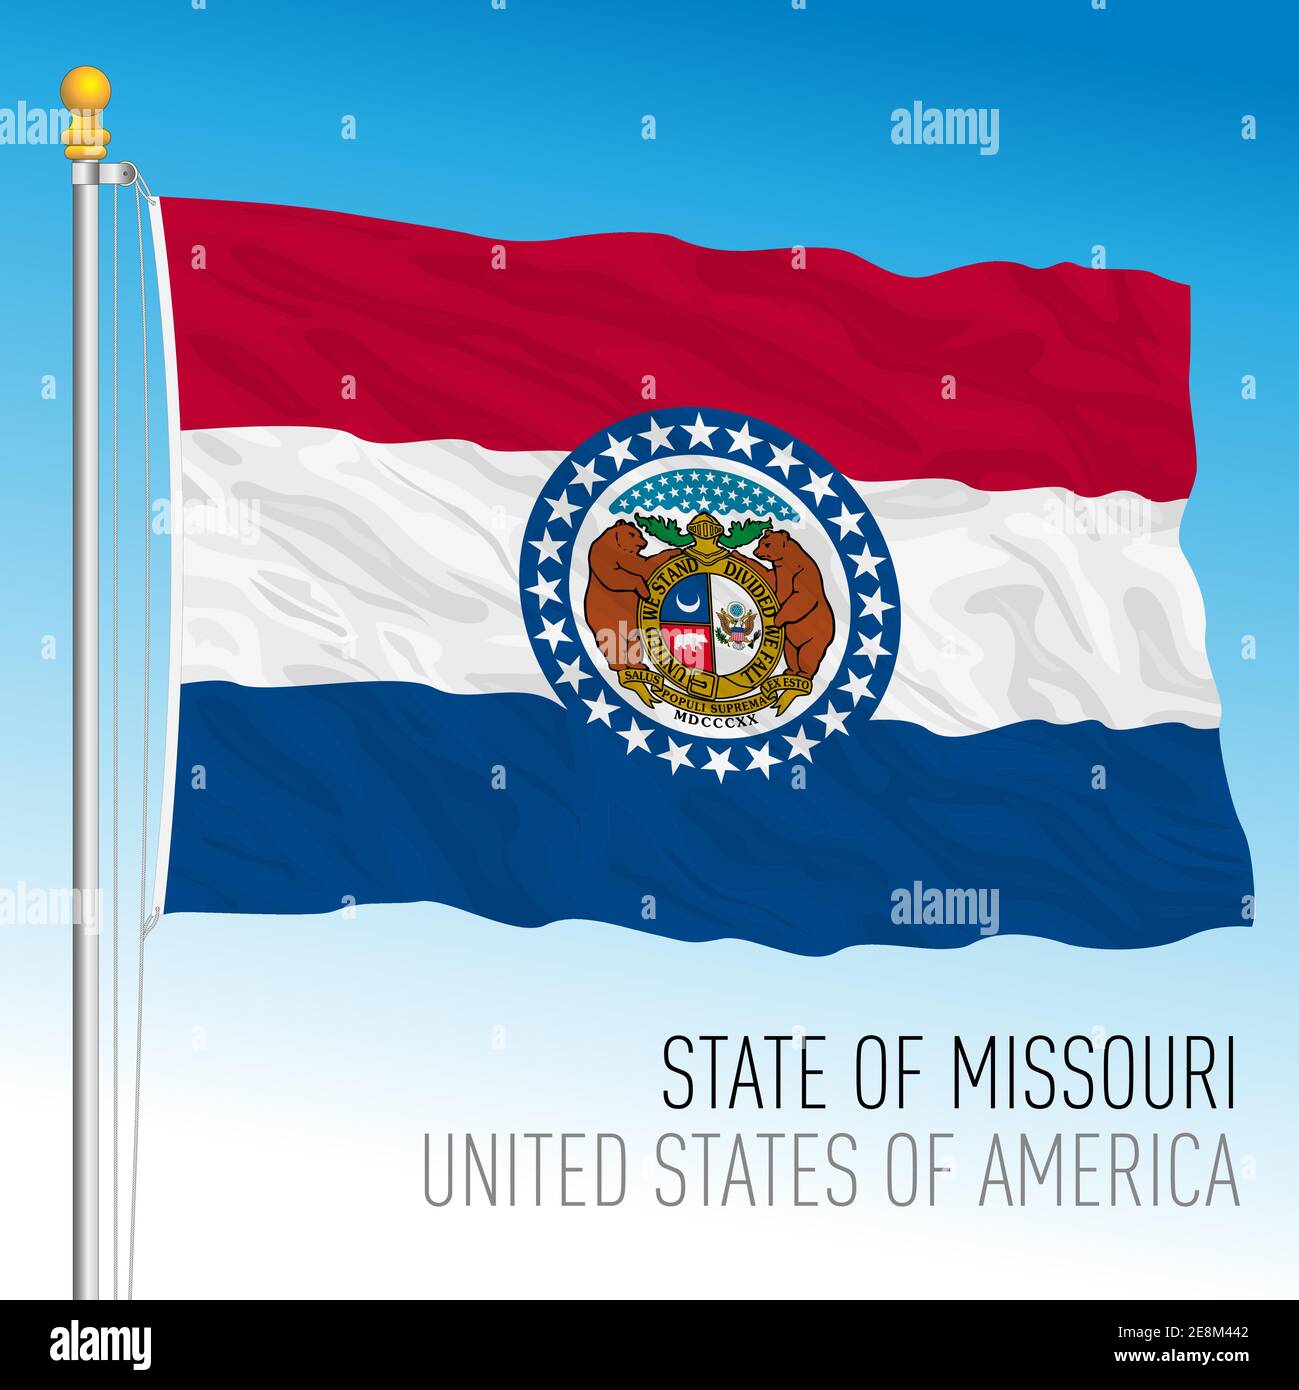 Missouri federal state flag, United States, vector illustration Stock Vector